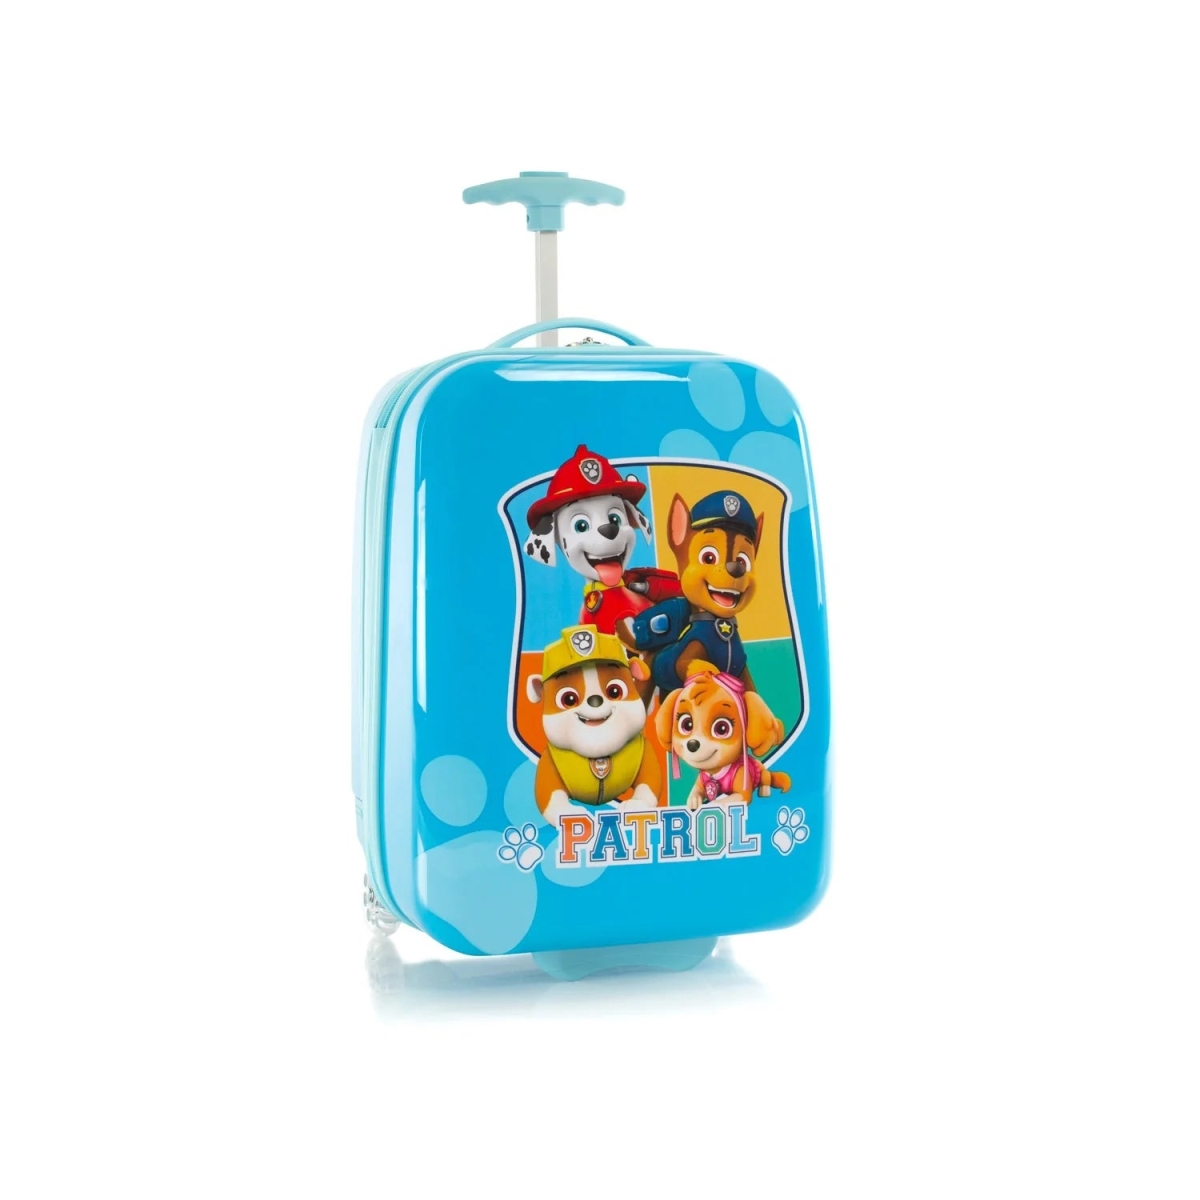 Paw Patrol 30392815 Hard Case Polycarbonate Cartoon Print Square Luggage with Two Wheels